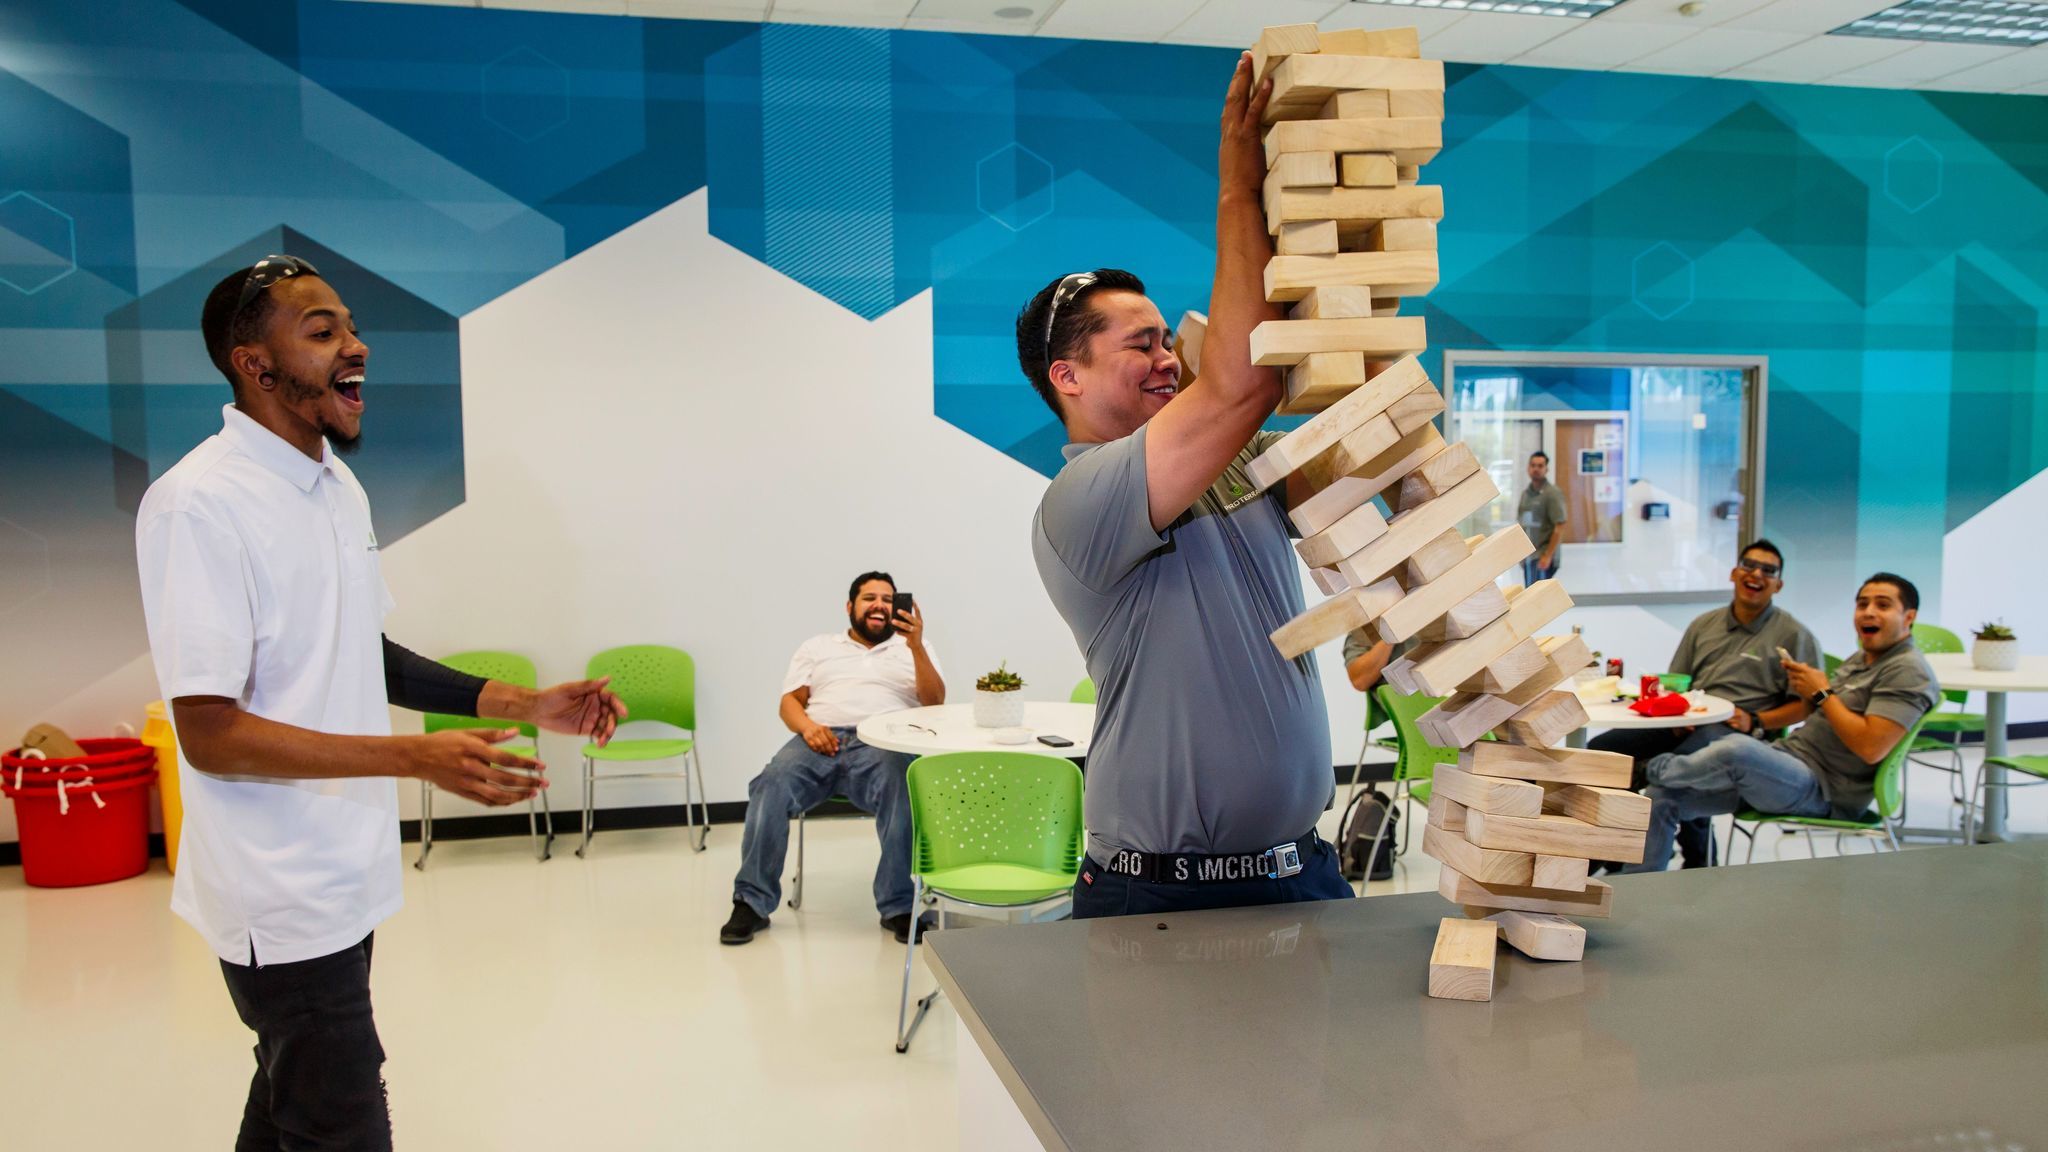 Derik Stone and Manny Almanza play giant Jenga on their lunch break. Proterra gives them 45 minutes.